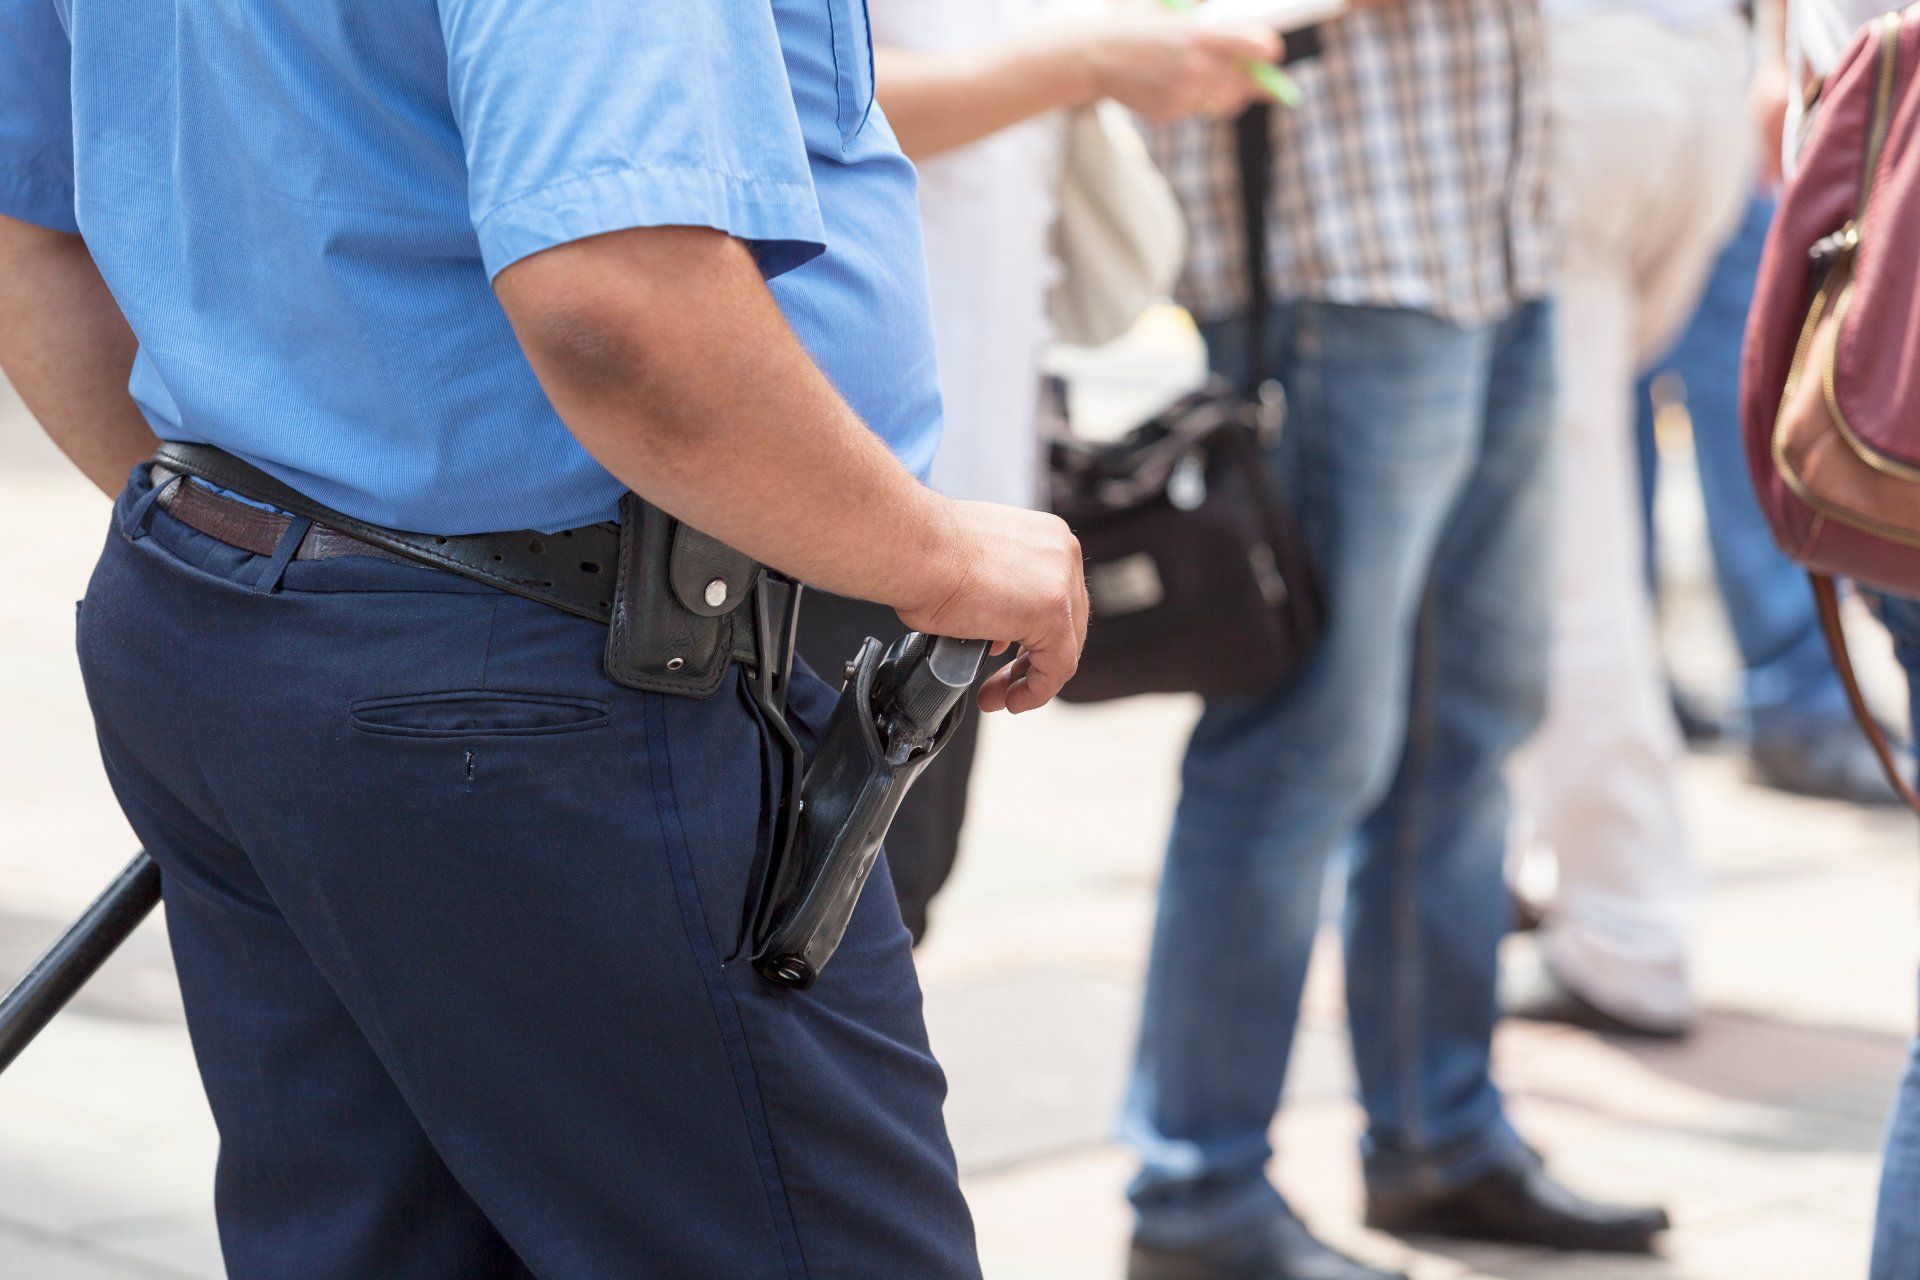 A police officer stands with his hand on his gun in its holster - police brutality